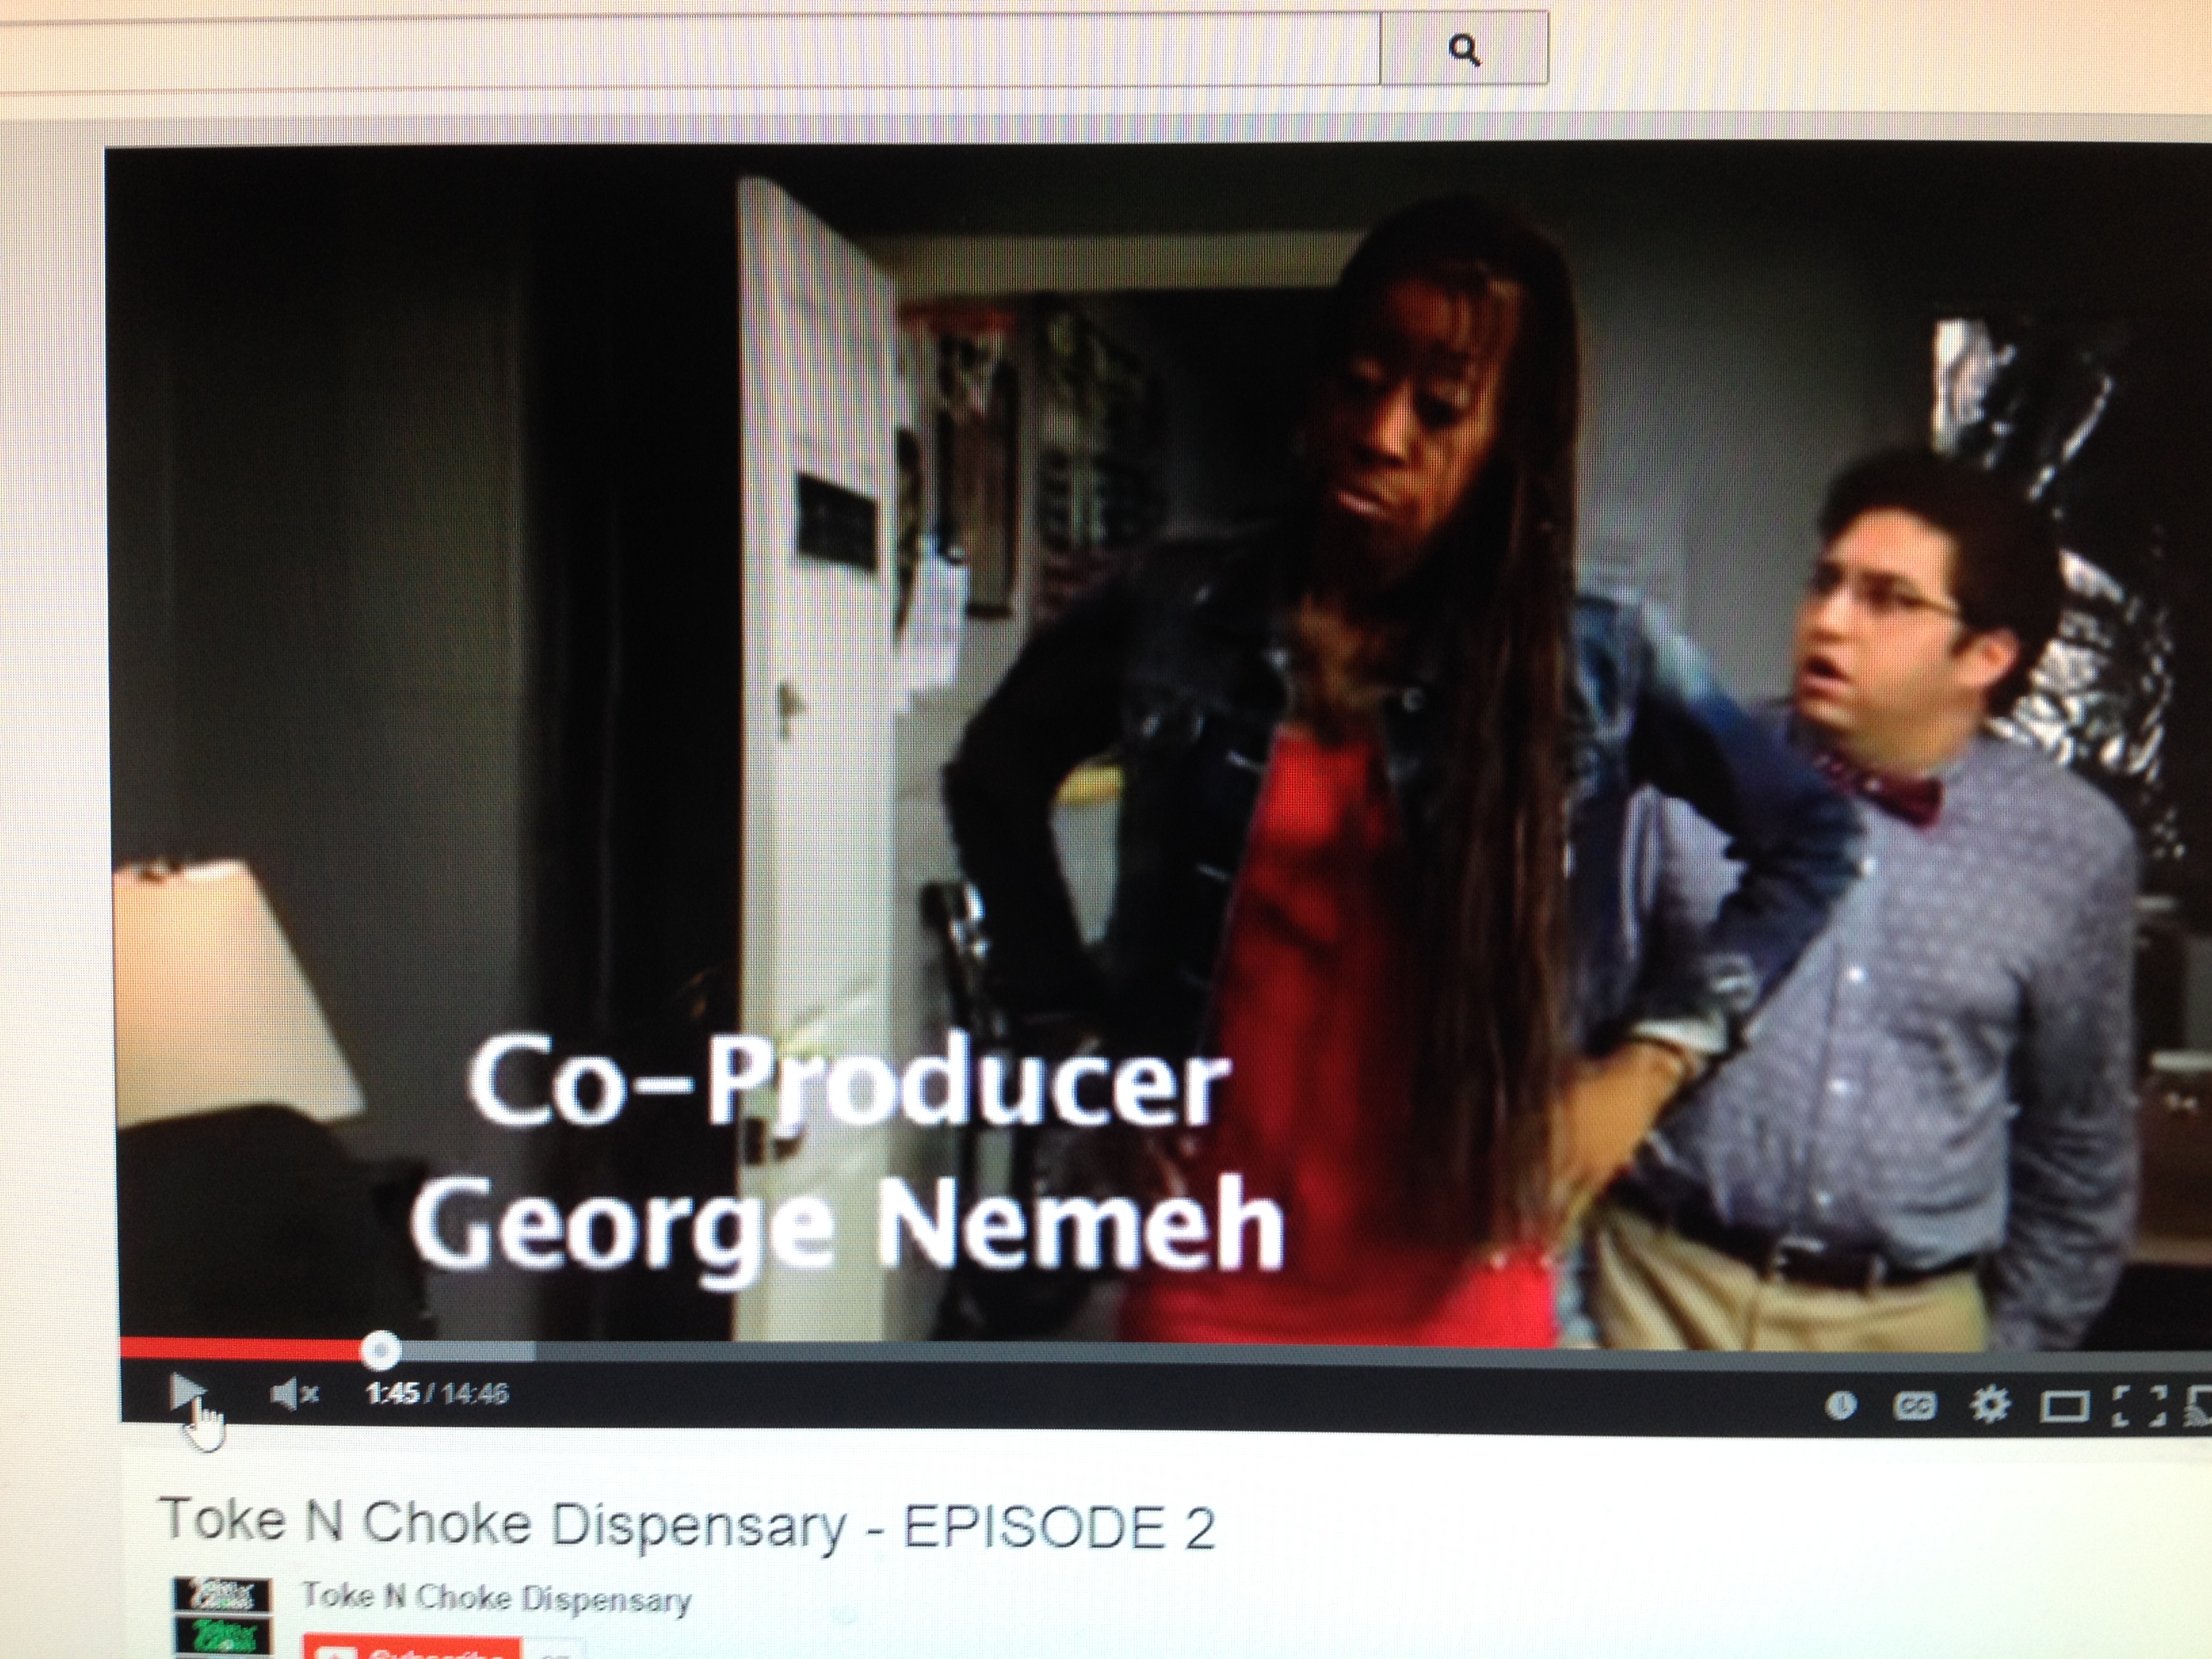 Co-Producer George Nemeh! ! I believe very soon George's name will be added on IMDb. Friend of ours send us this screen shot...thanks